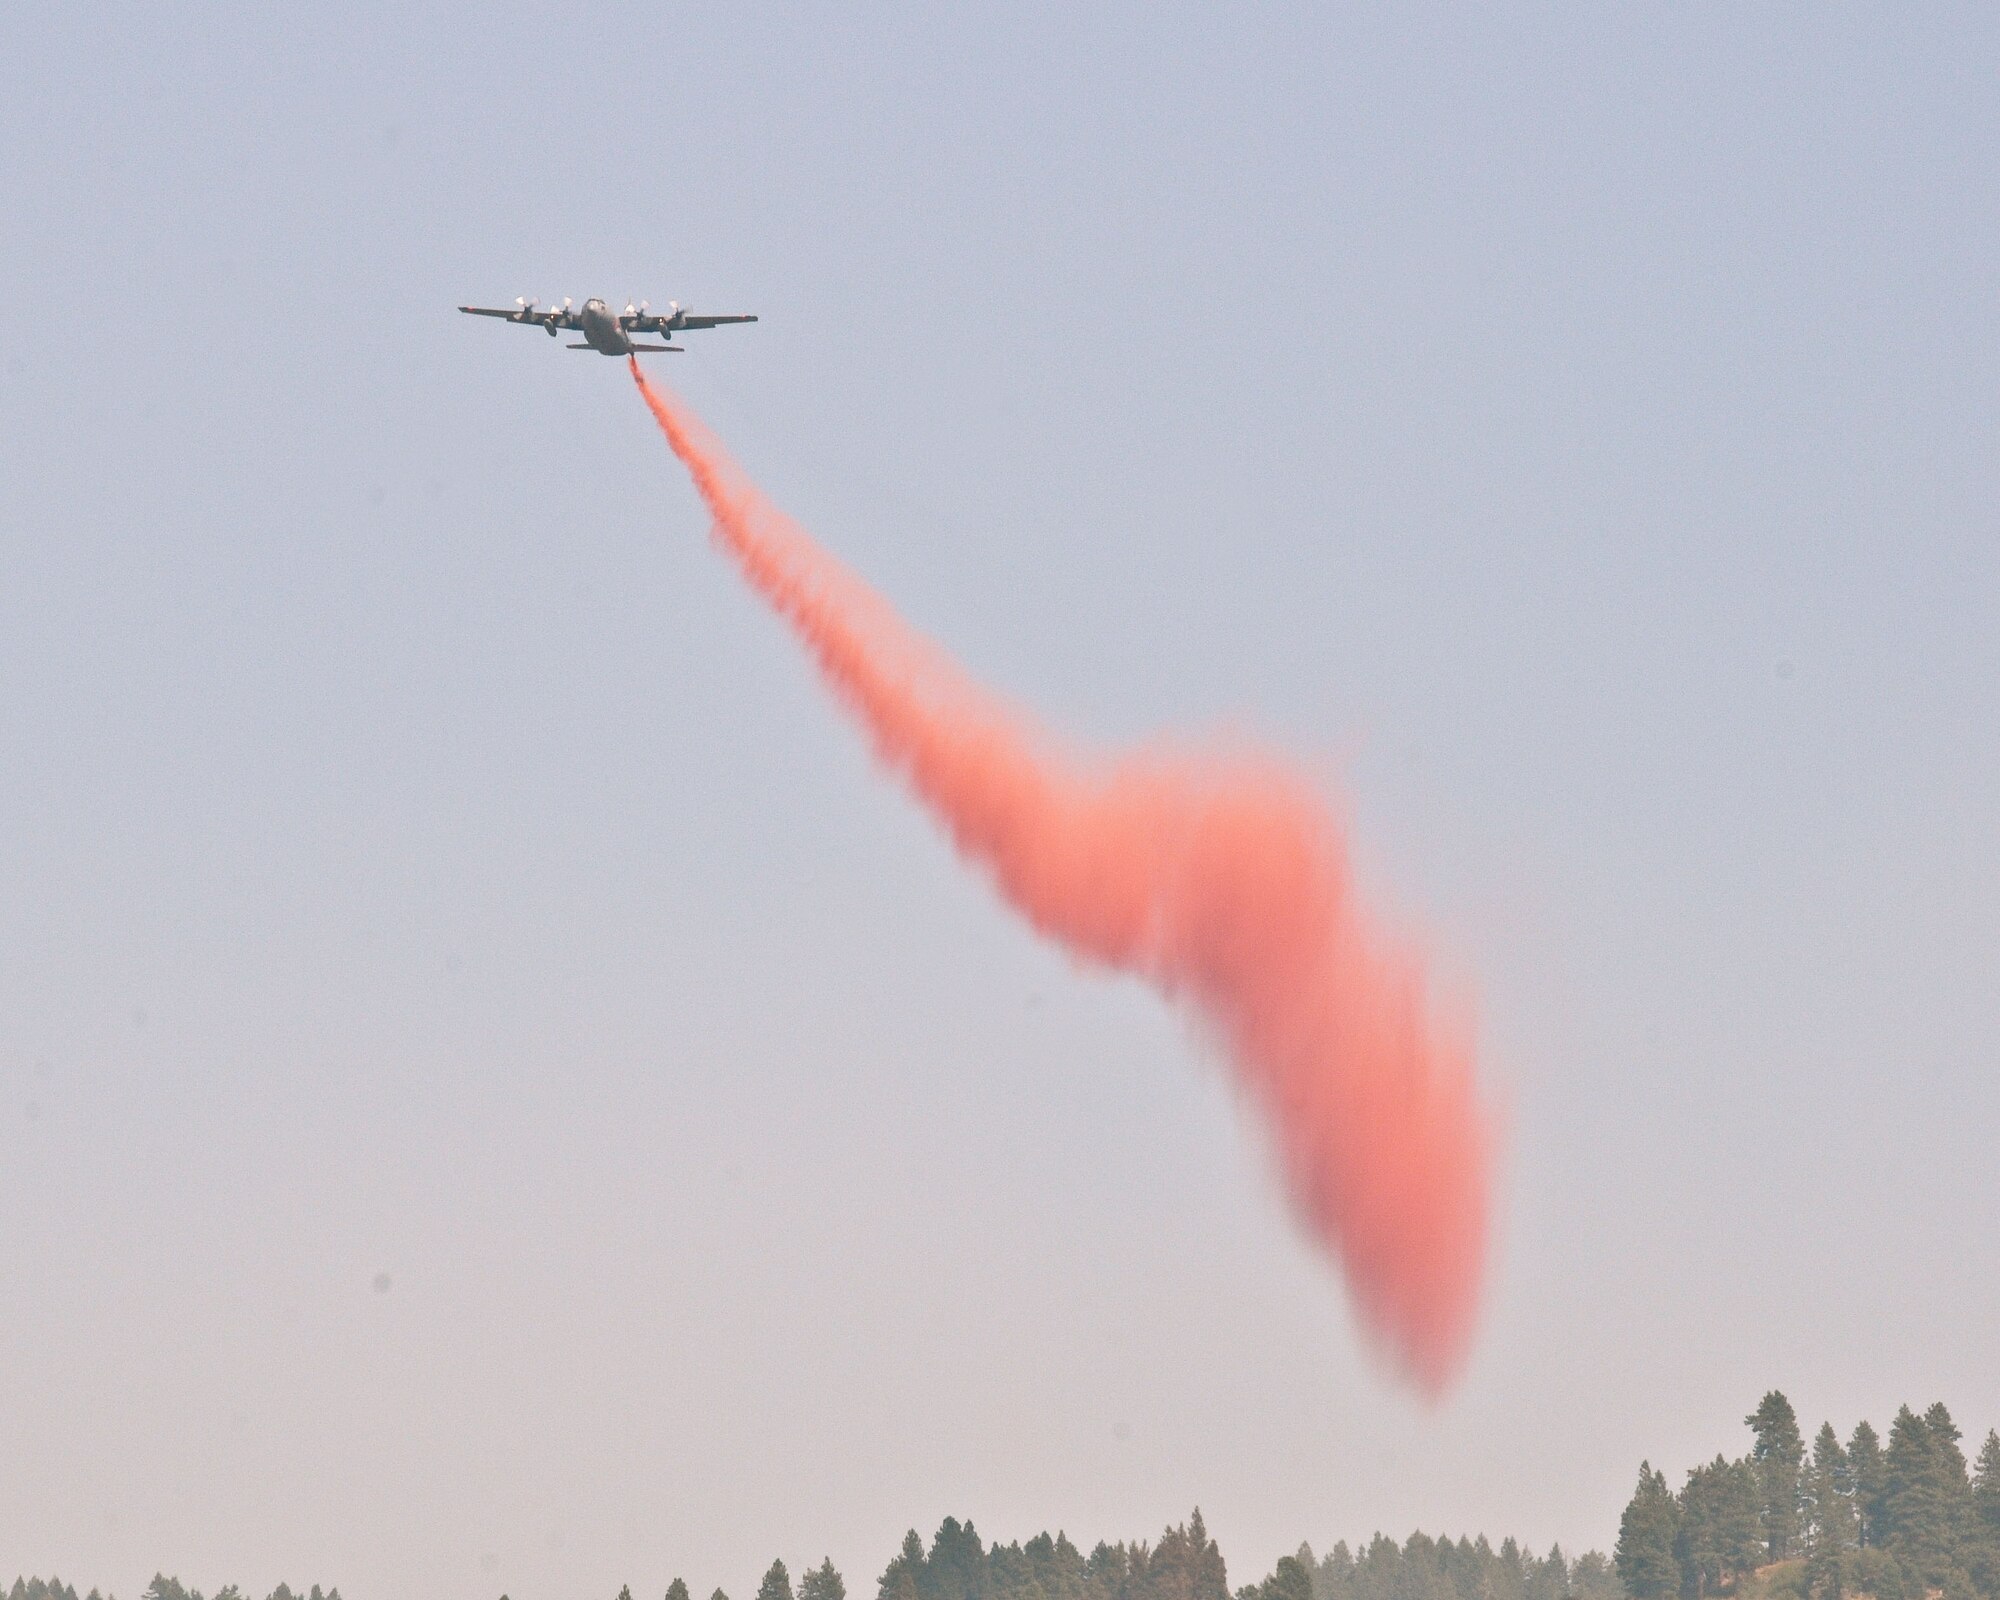 A C130-H from the 302nd Air Force Reserve Command drops retardant near the Springs fire north of Eagle, Idaho Aug. 9, 2012. The 146th Airlift Wing currently has two C130-Js equipped with MAFFS assisting U.S. Forest Service with wildfire suppression in Boise, Idaho. (U.S. Air Force photo by: Master Sgt. Dave Buttner)